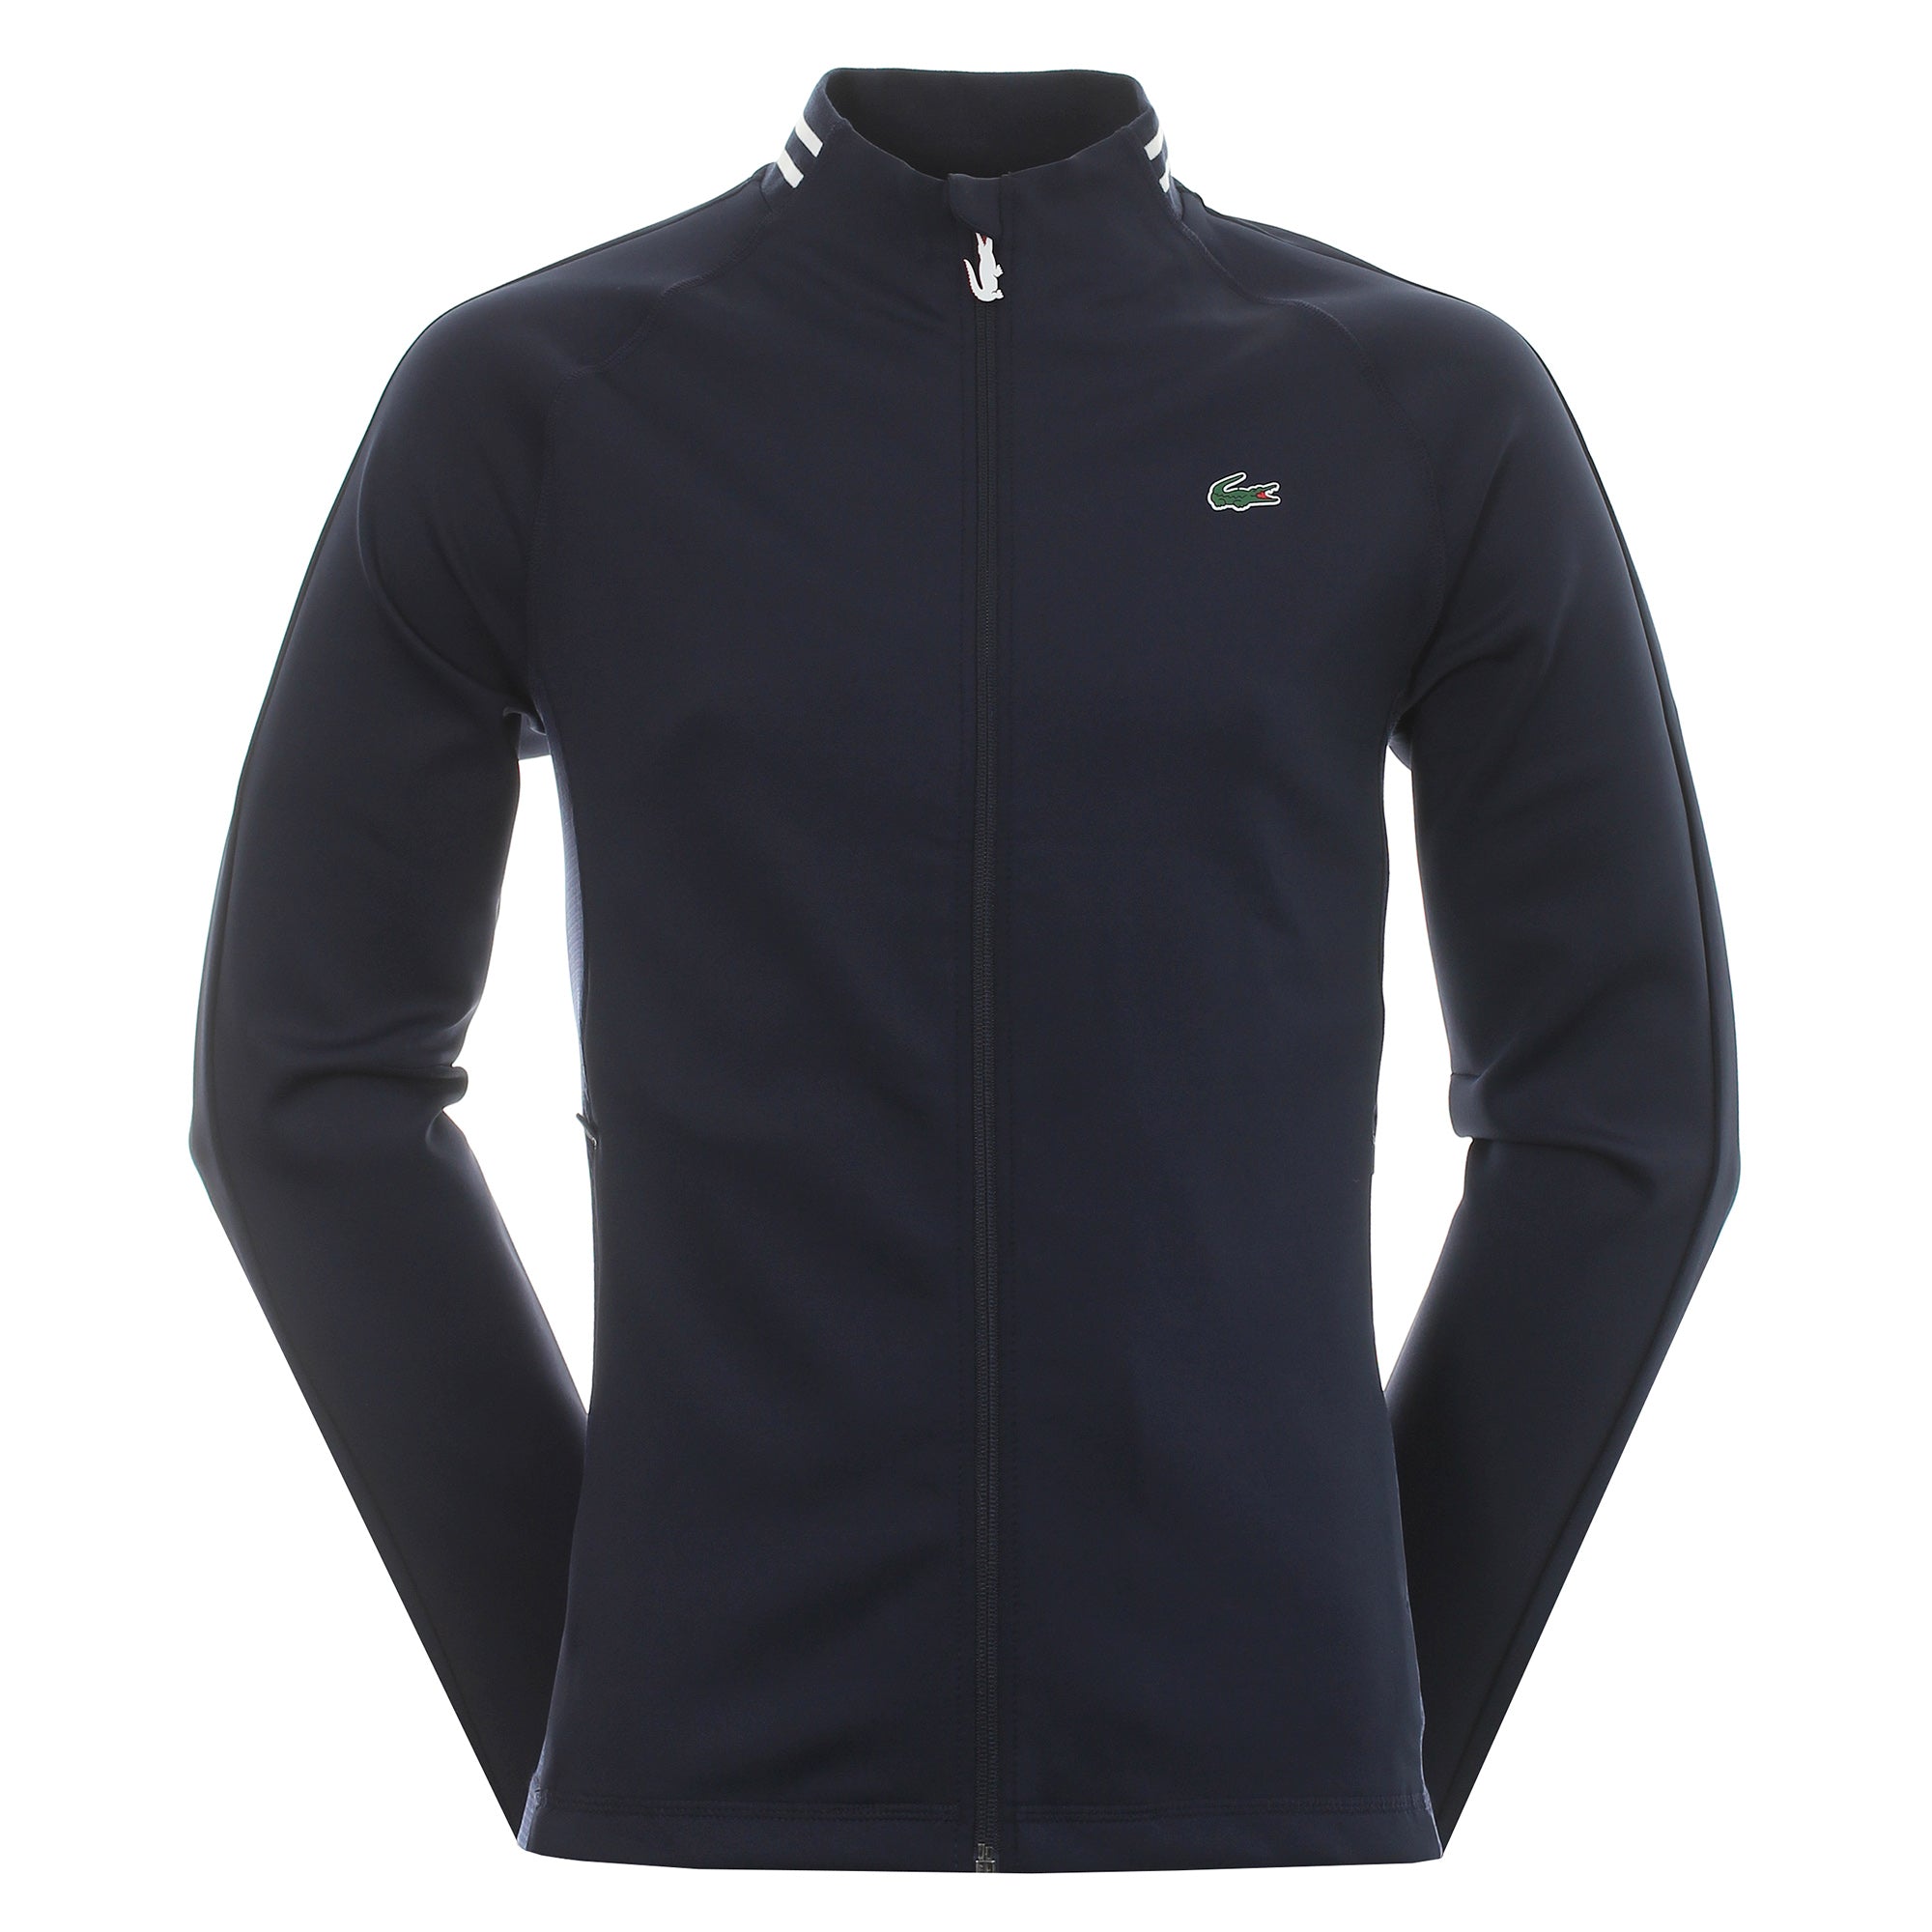 Lacoste Technical Stretch Full Zip Jacket SH2347 Navy White R26 ...